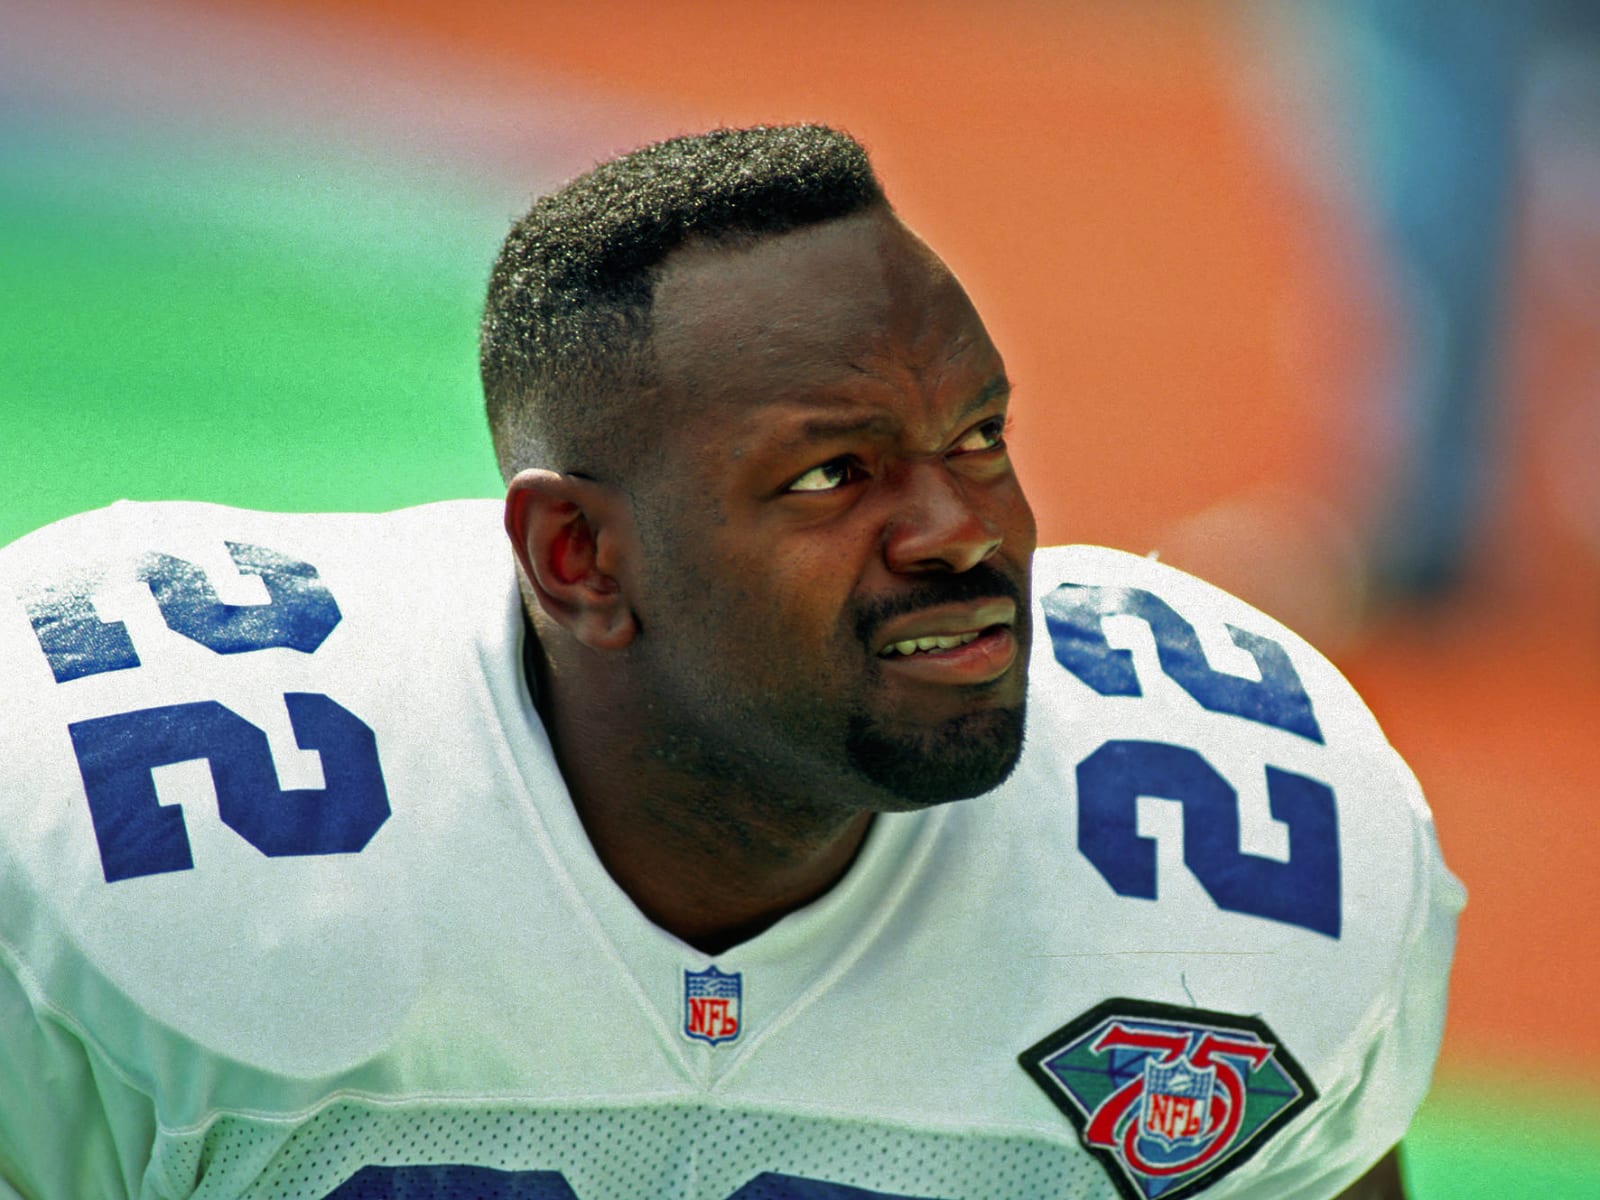 Emmitt Smith Wallpapers